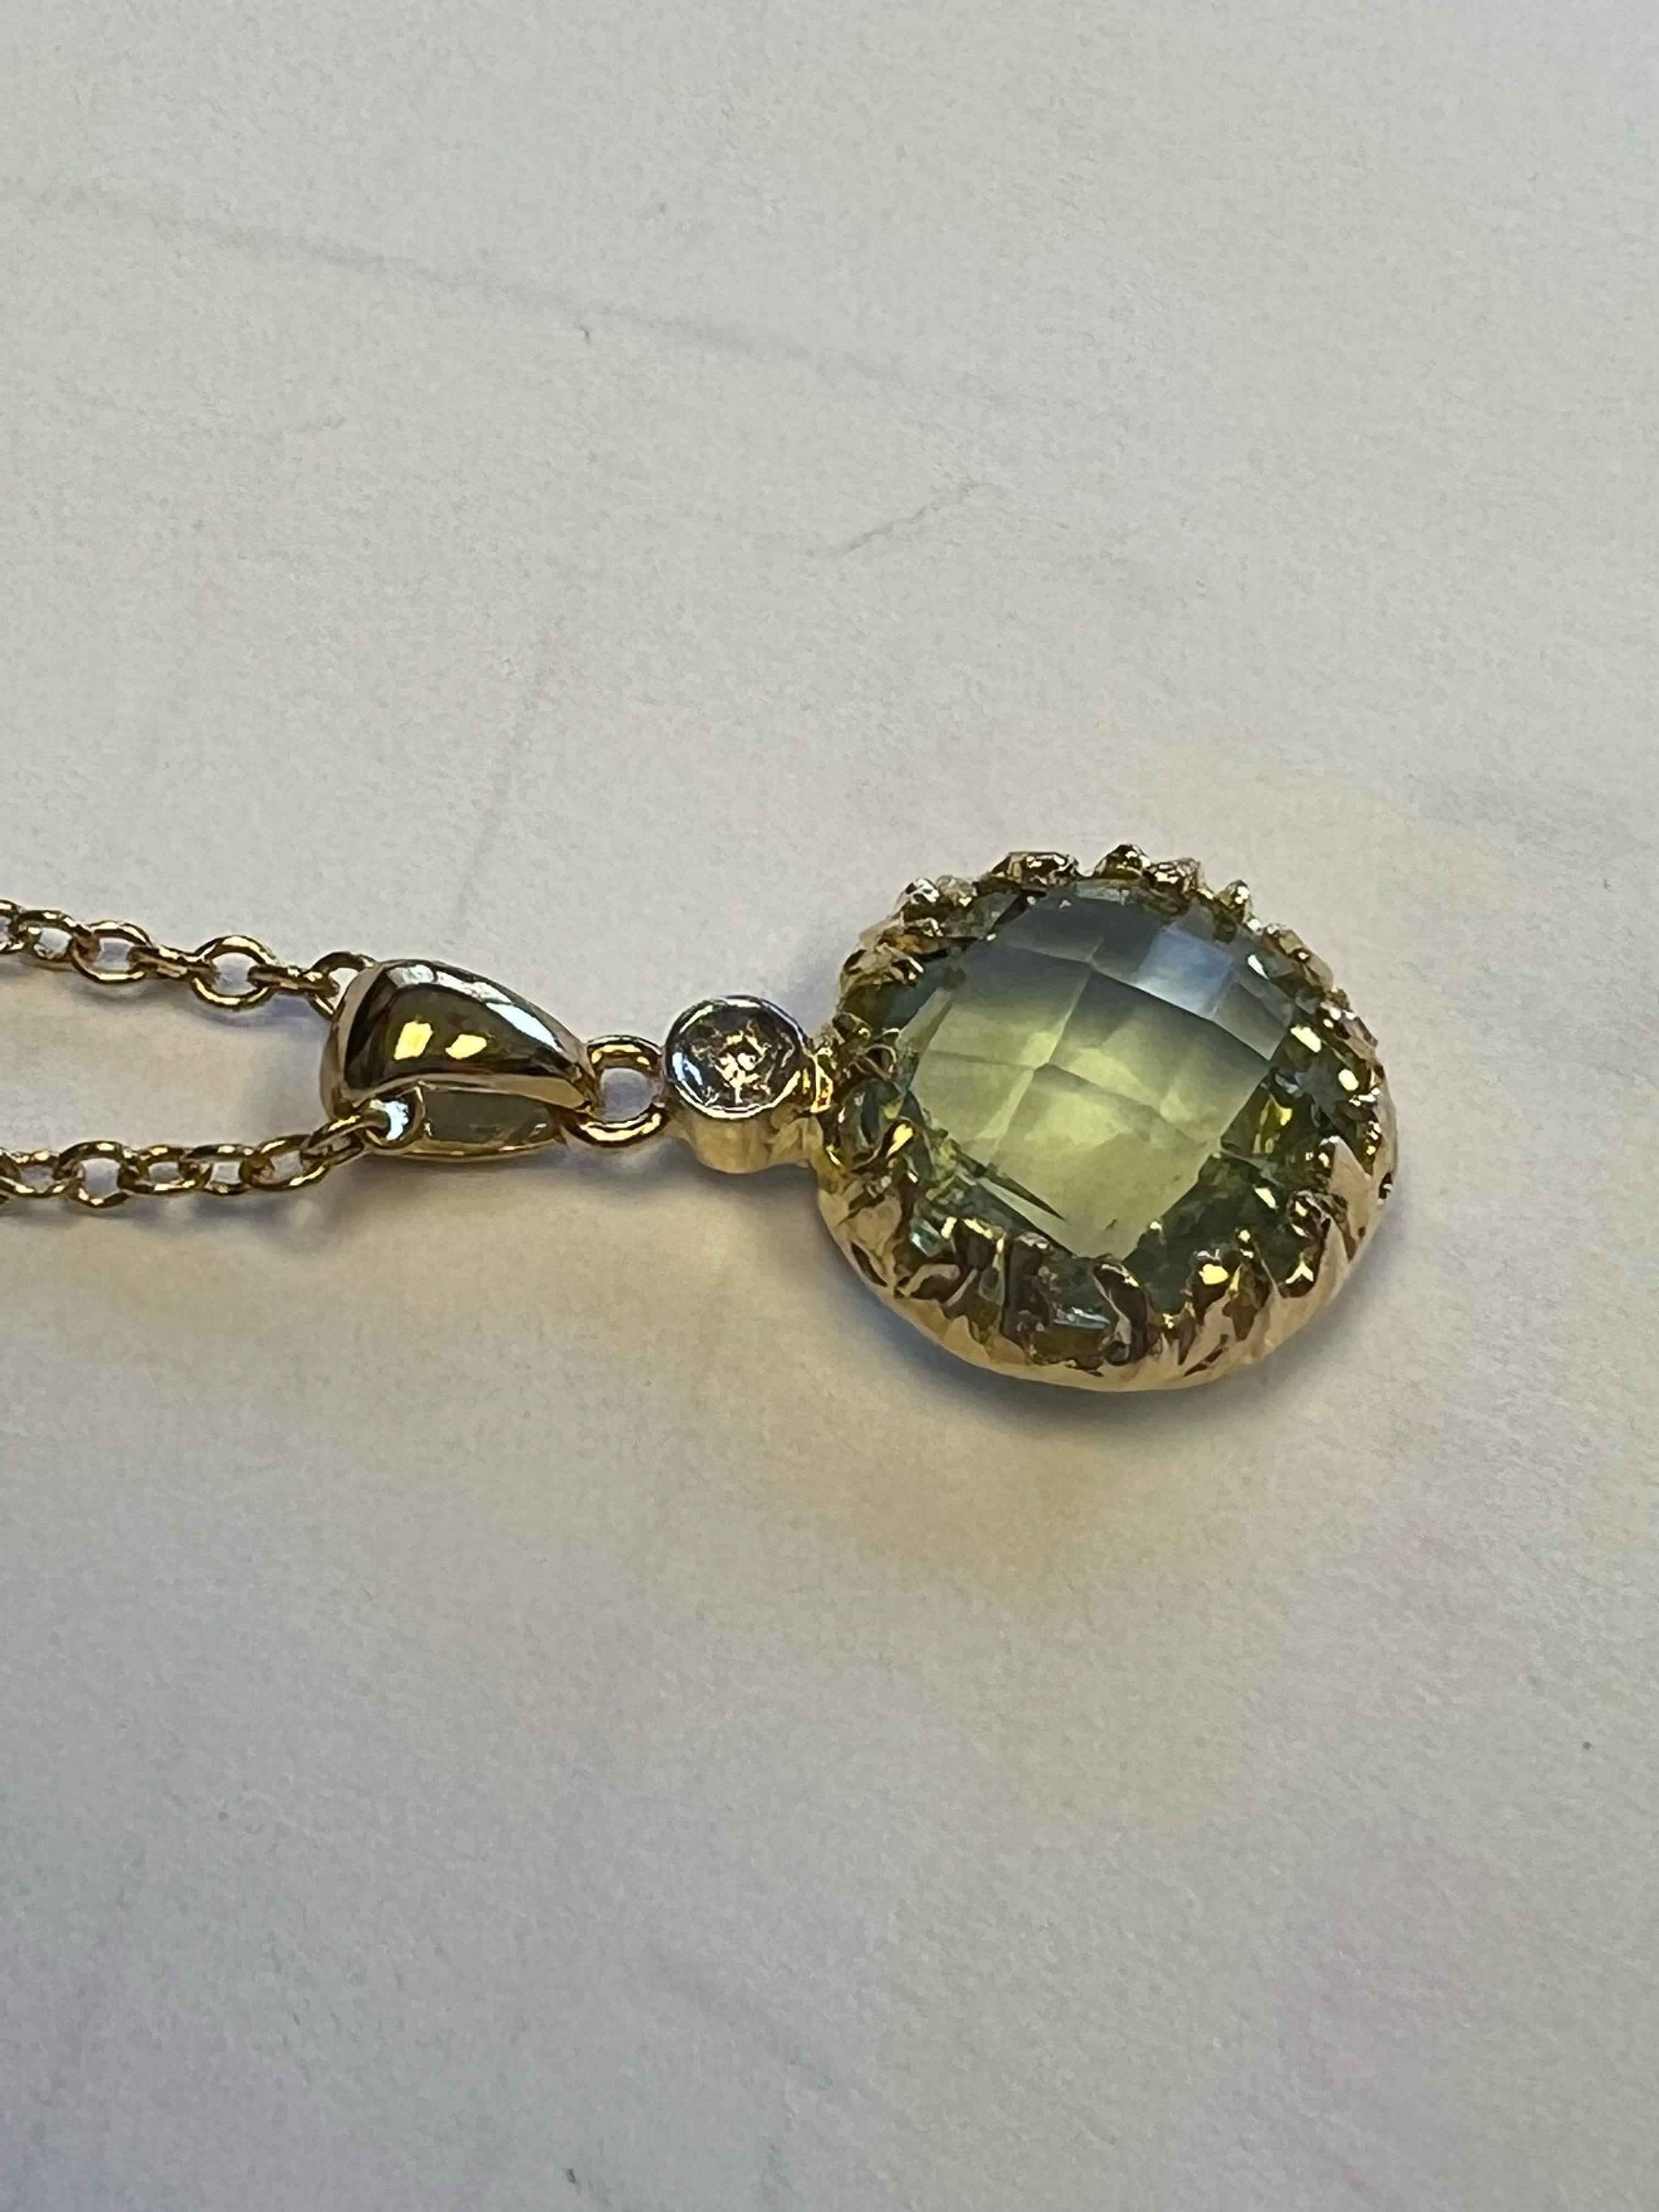 Handcrafted 14k Yellow Gold 3.25 Carat Green Amethyst Color Stone Pendant In New Condition For Sale In Great Neck, NY